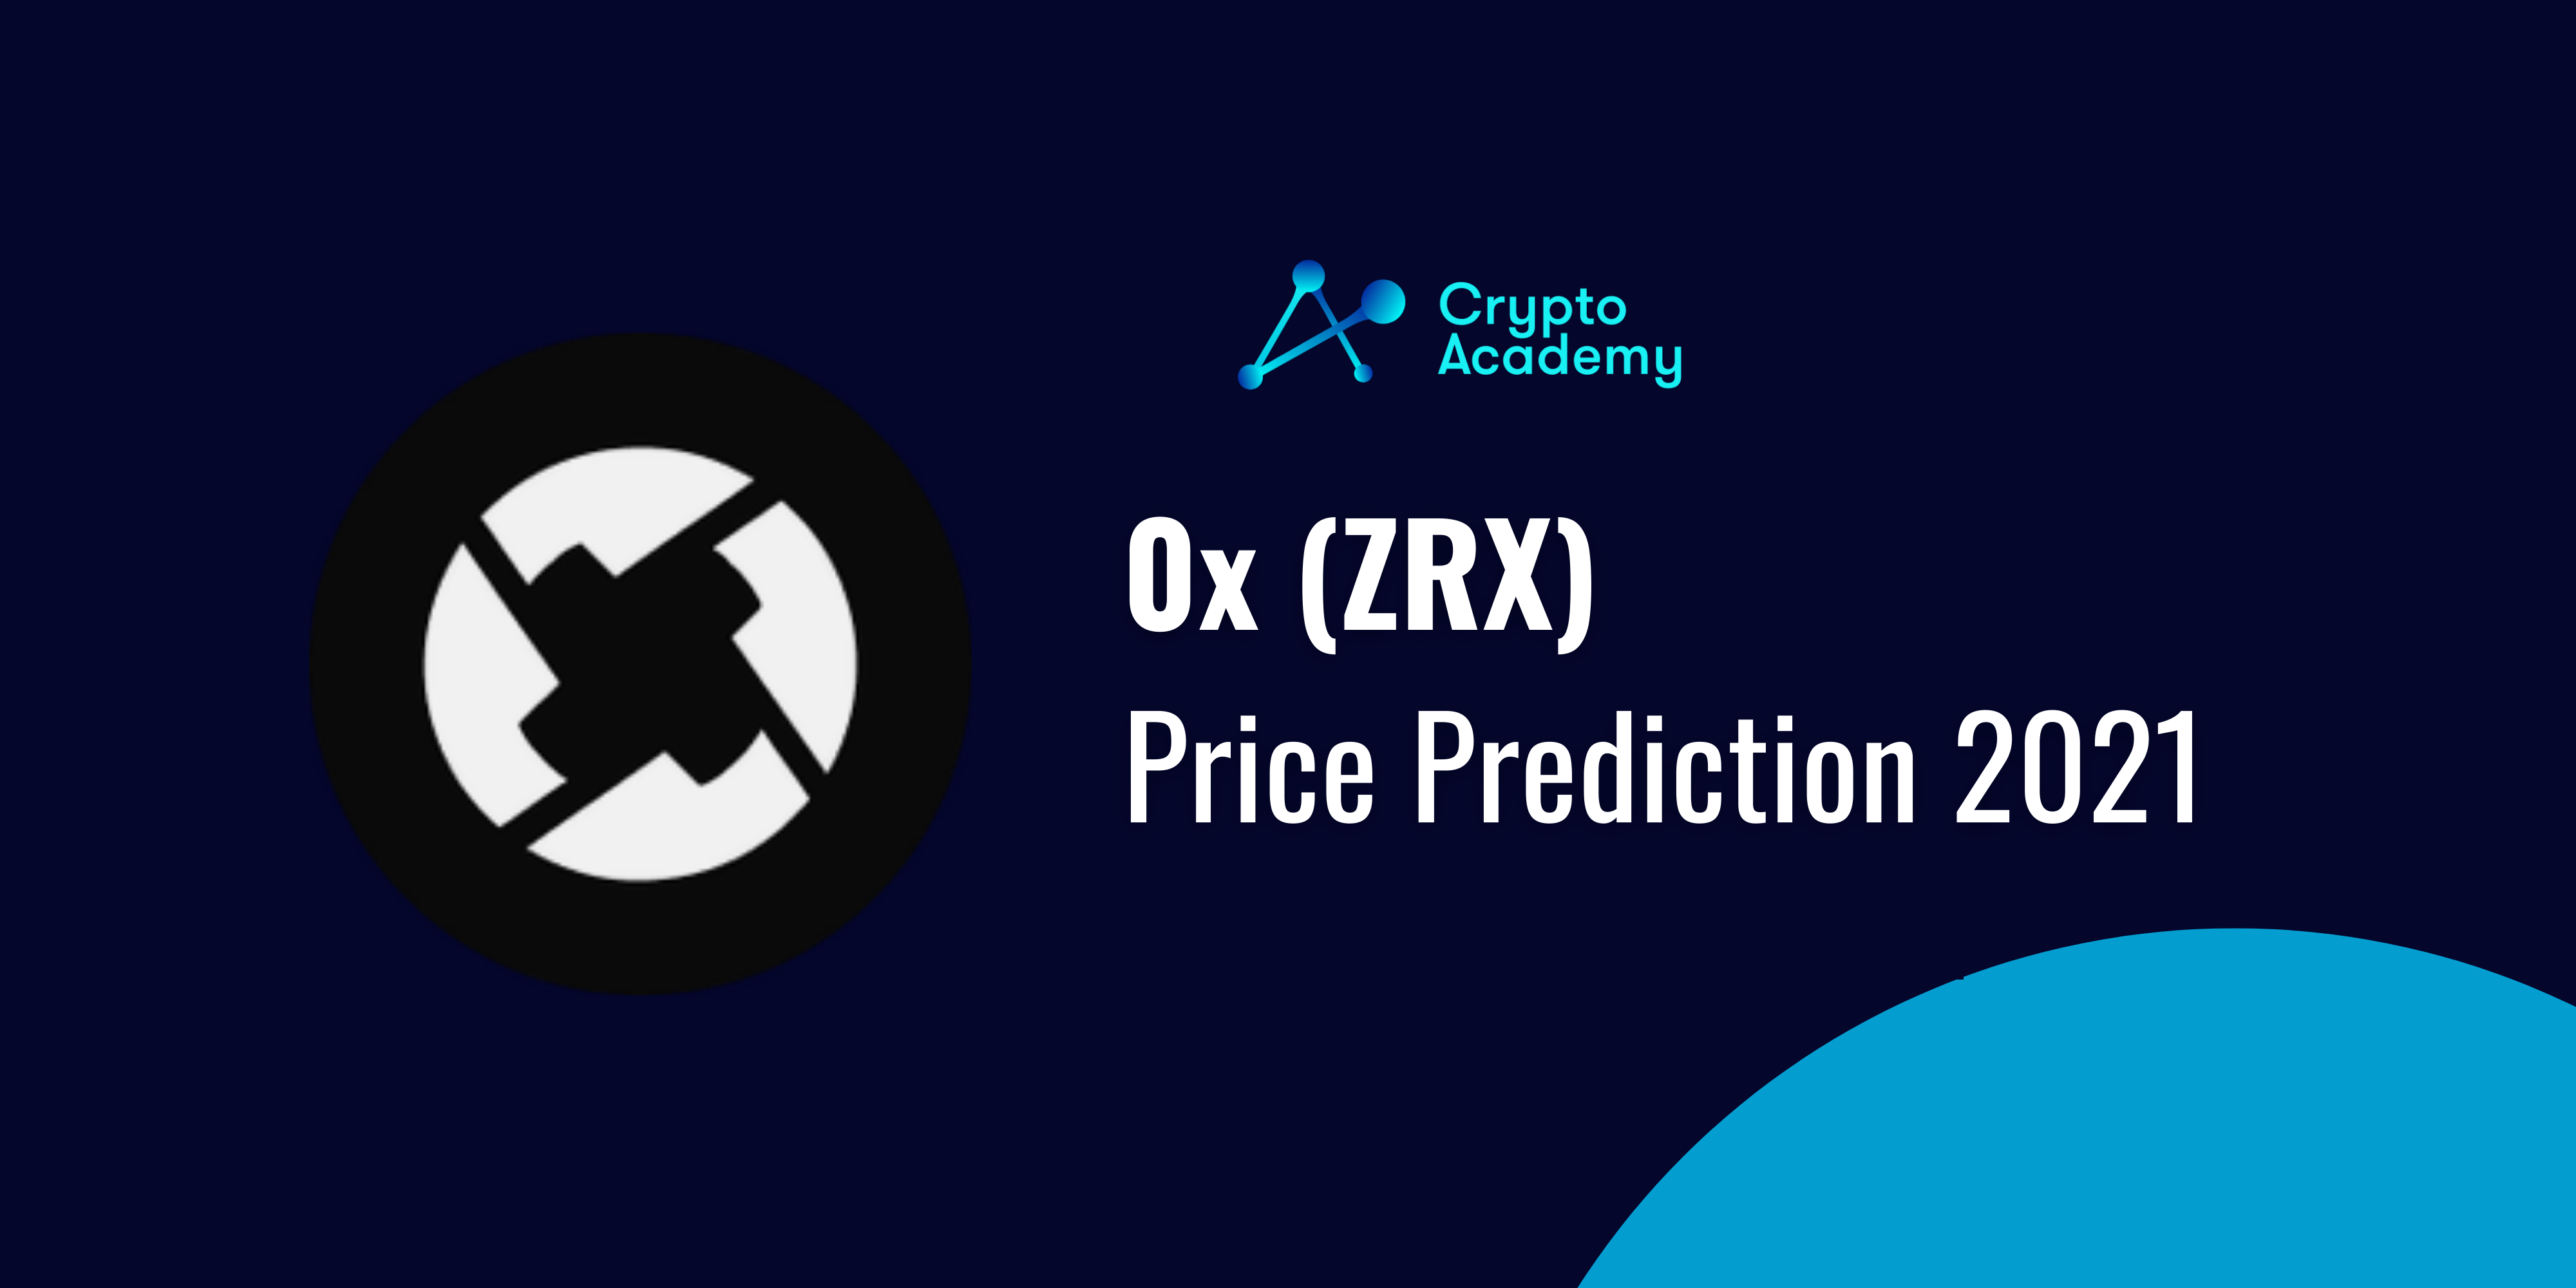 0x (ZRX) Price Prediction 2021 and Beyond – Is 0x a Good Investment?